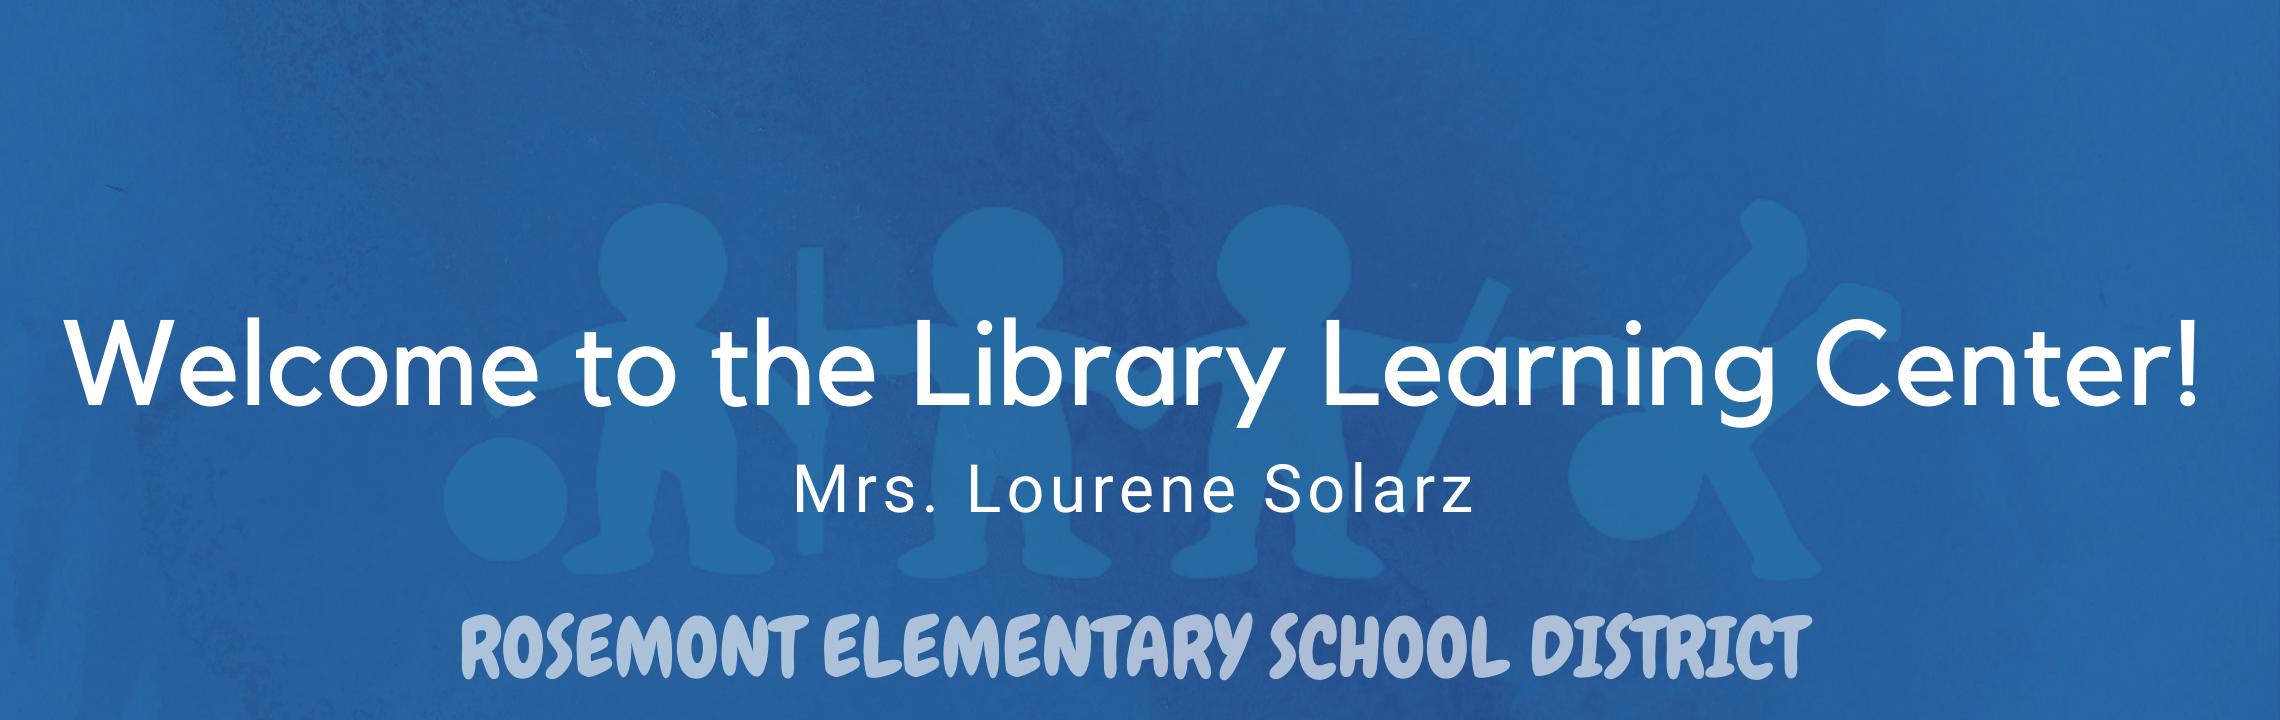 Welcome to the Library Learning Center! Mrs. Lourene Solarz 